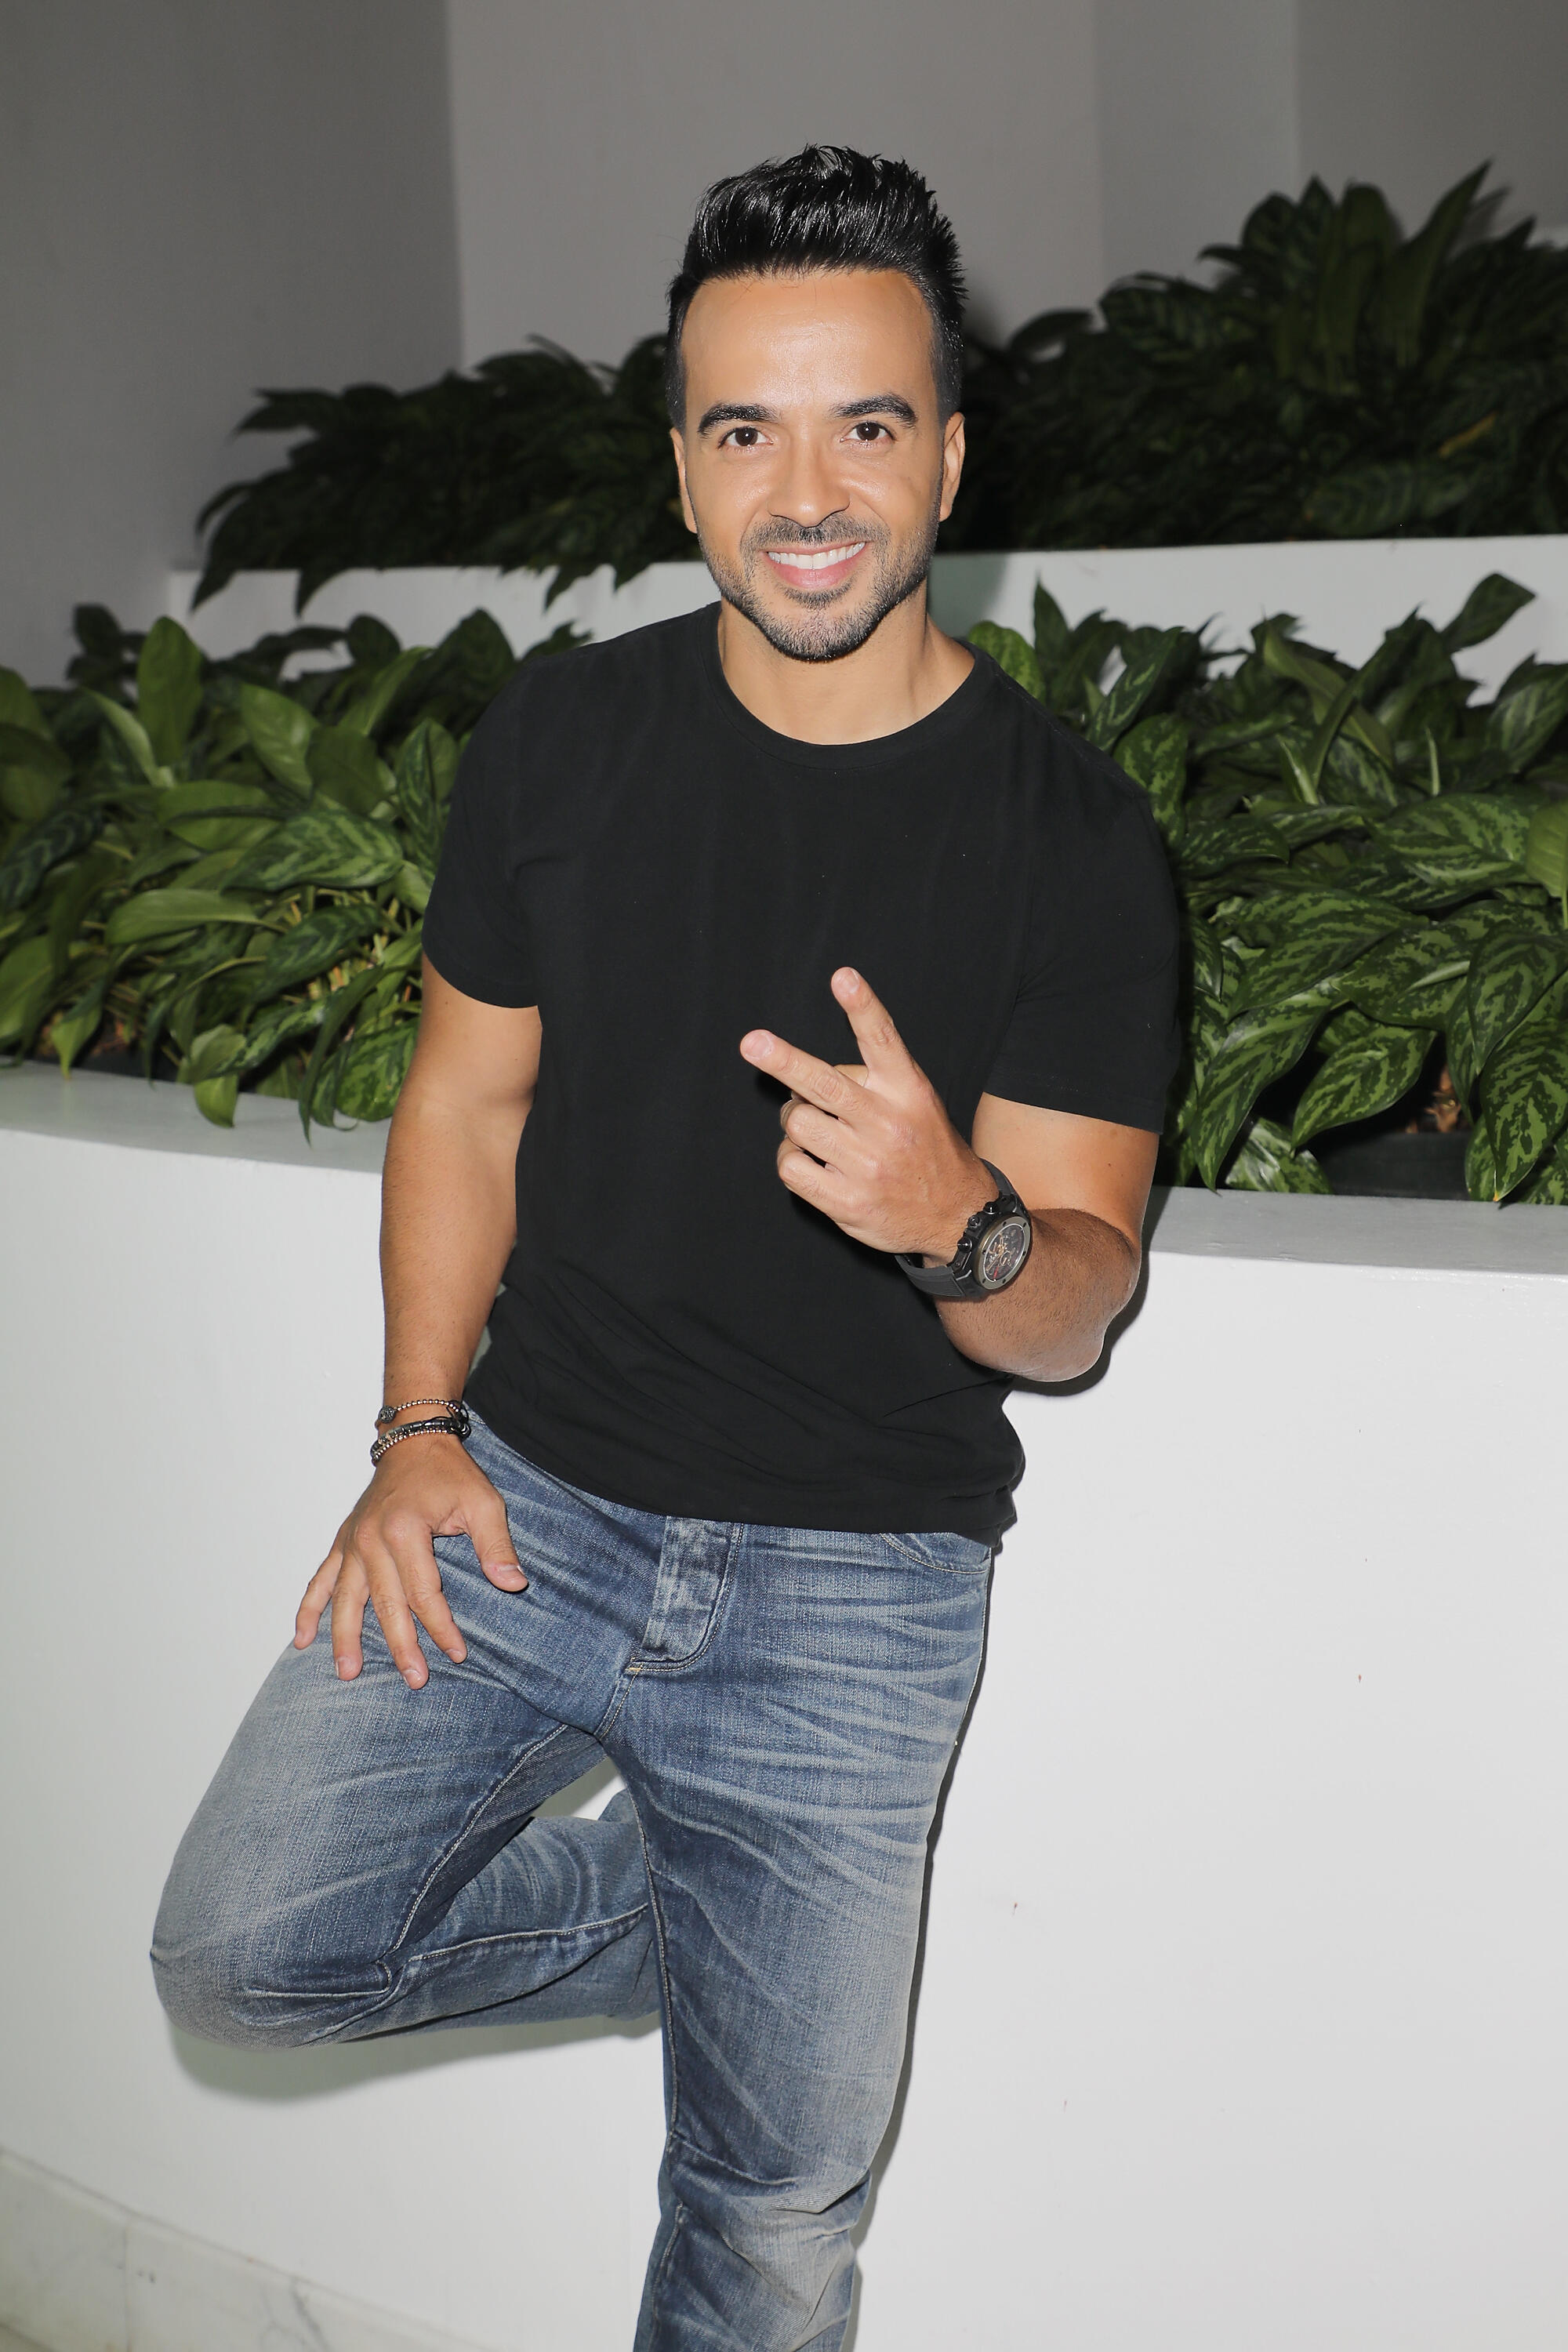 MIAMI BEACH, FL - JUNE 09:  Luis Fonsi attends the iHeartSummer '17 Weekend By AT&T, Day 1 at Fontainebleau Miami Beach on June 9, 2017 in Miami Beach, Florida.  (Photo by Alexander Tamargo/Getty Images for iHeartMedia)